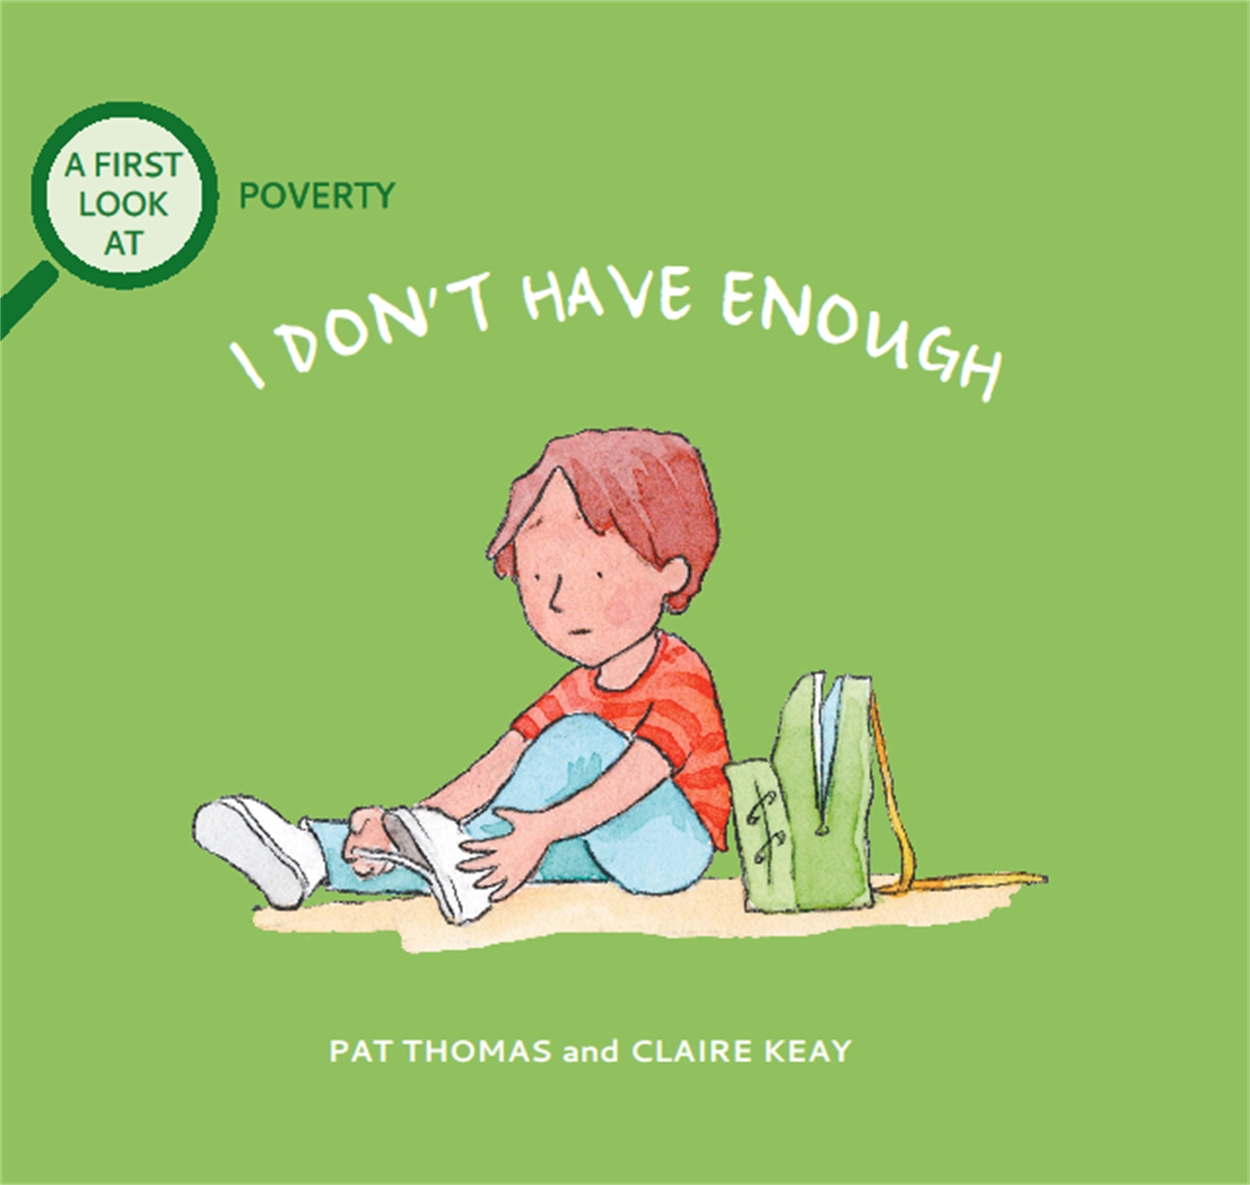 A　UK　Thomas　Poverty:　Pat　Look　I　First　by　Enough　Have　Don't　At:　Hachette